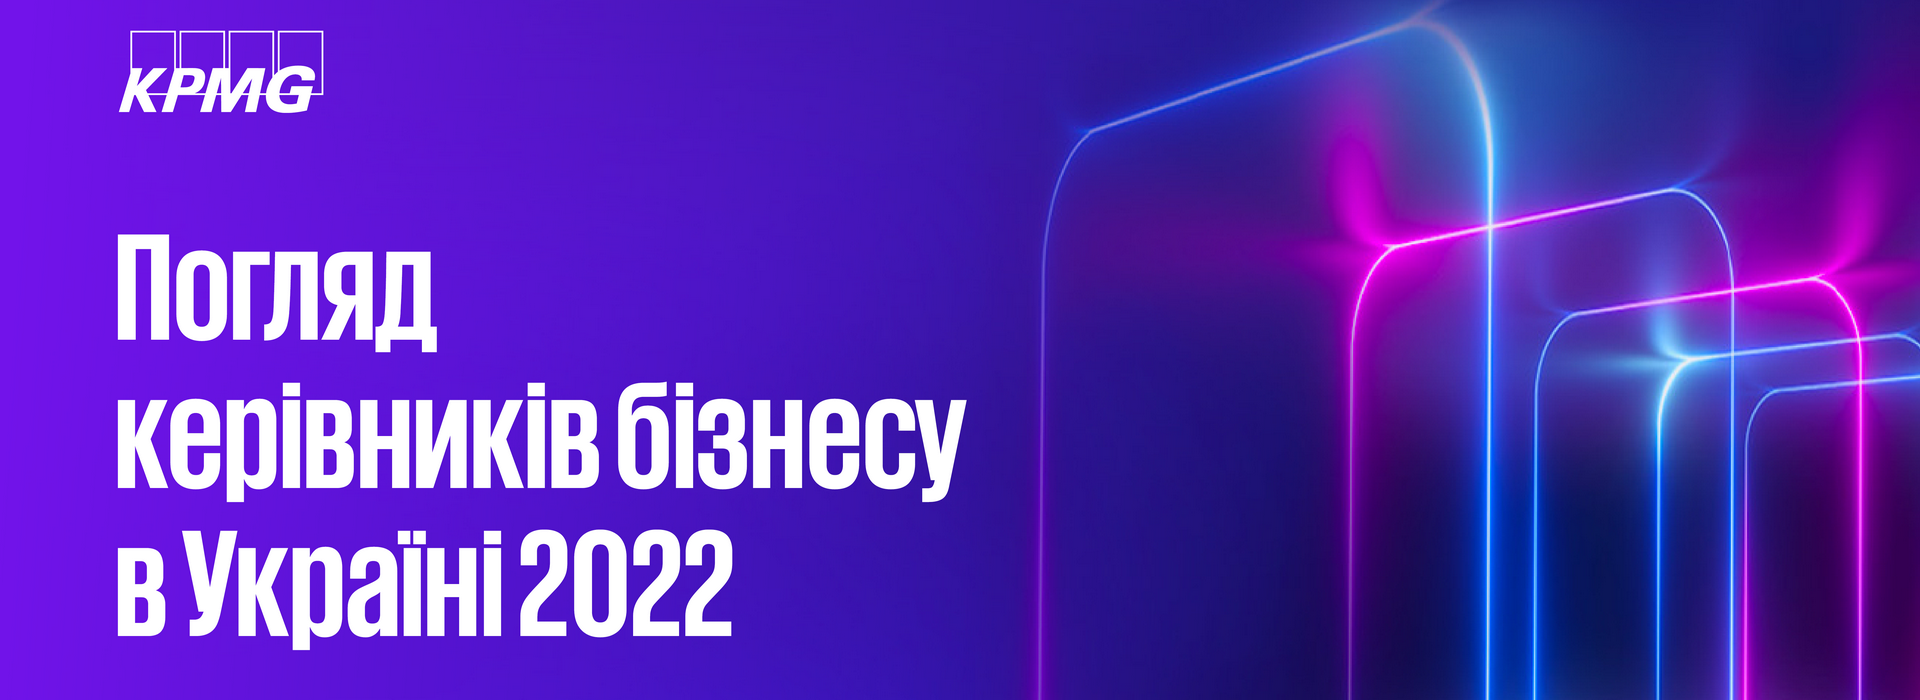 KPMG in Ukraine Presents the Results of the Annual Survey “CEO Outlook” in Ukraine and the World in 2022